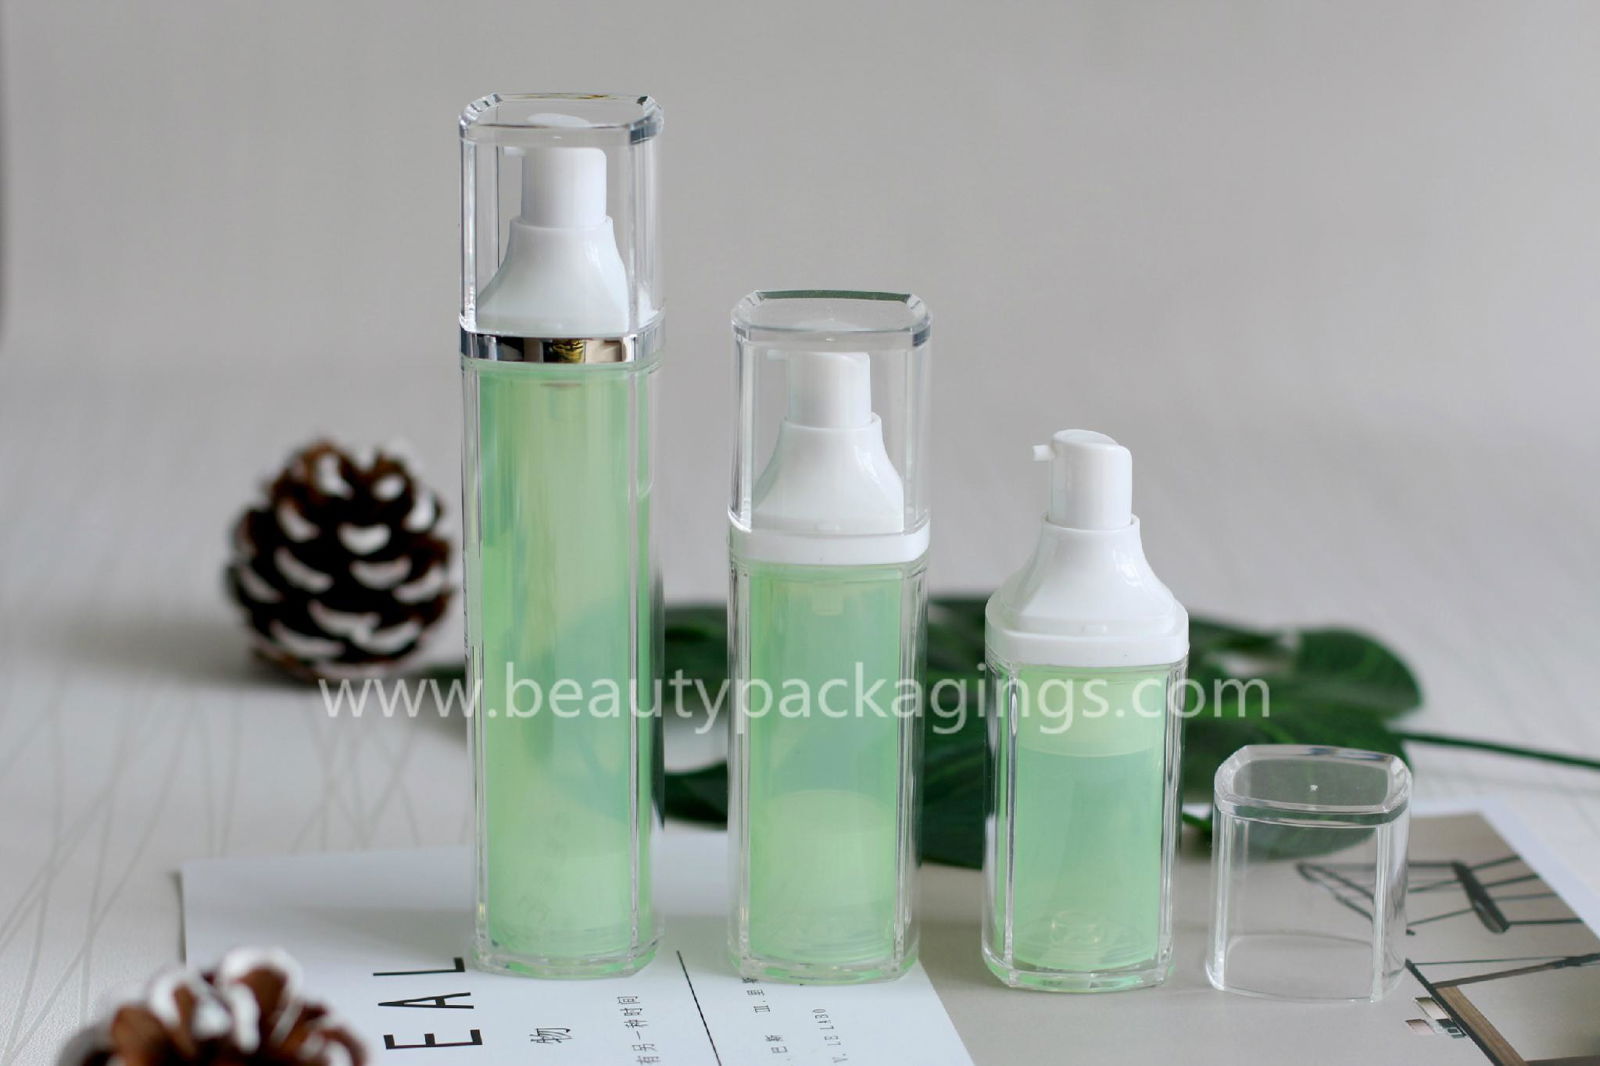 Various Airless Pump Bottle Luxury Design For Skin Care Facial Lotion 4